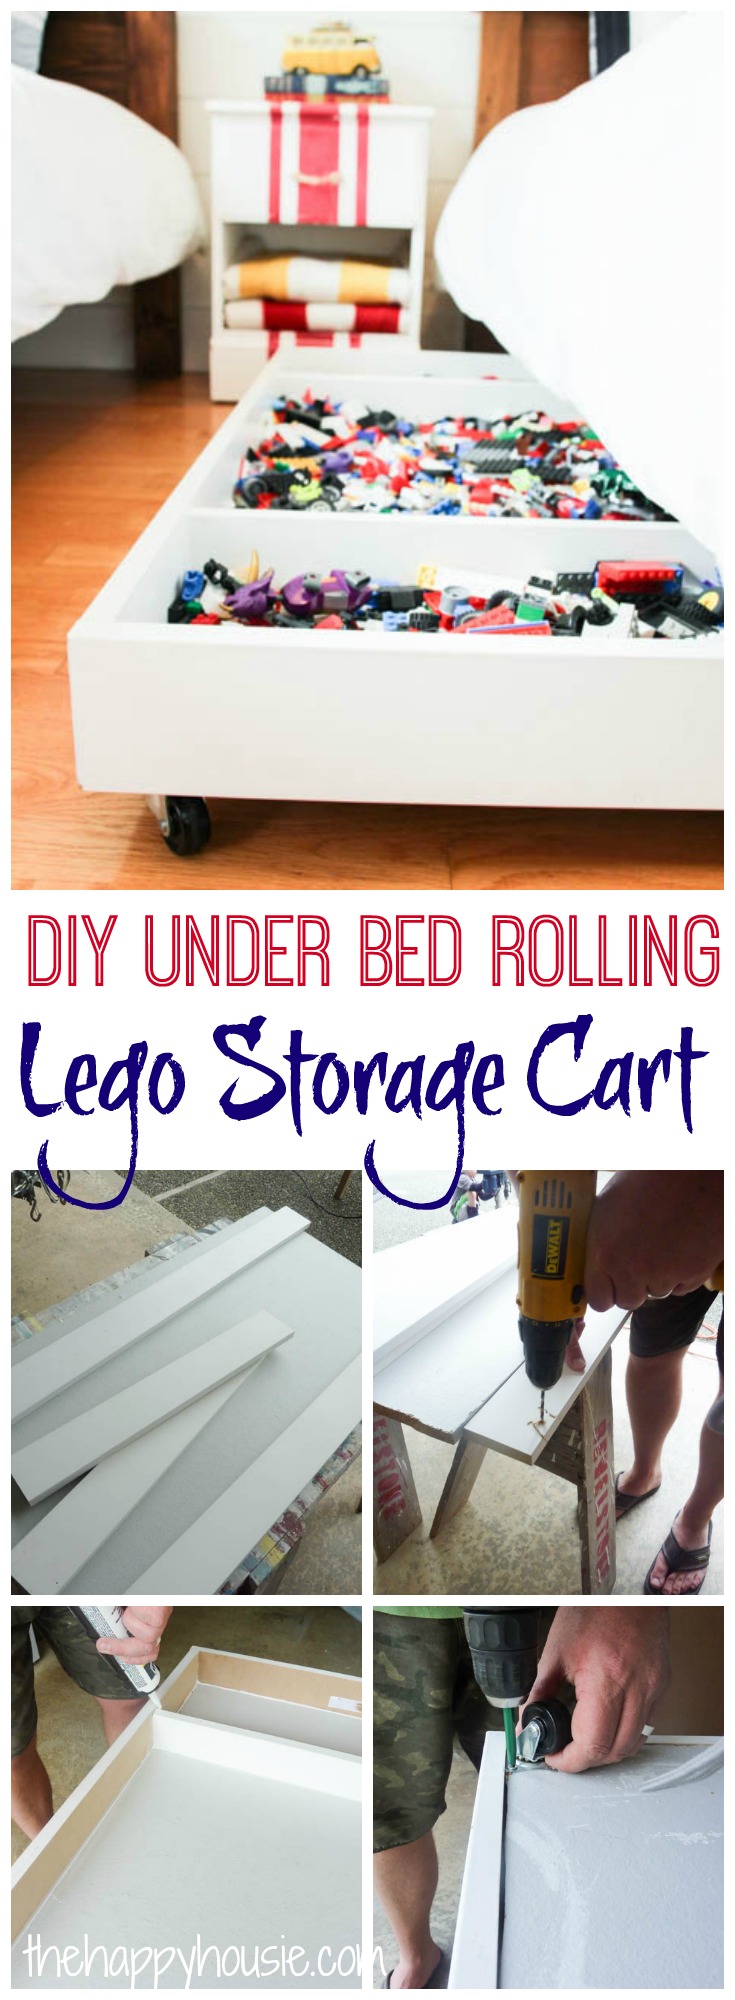 Tackle your lego storage issues with this DIY Under Bed Rolling Lego Storage Cart at thehappyhousie.com